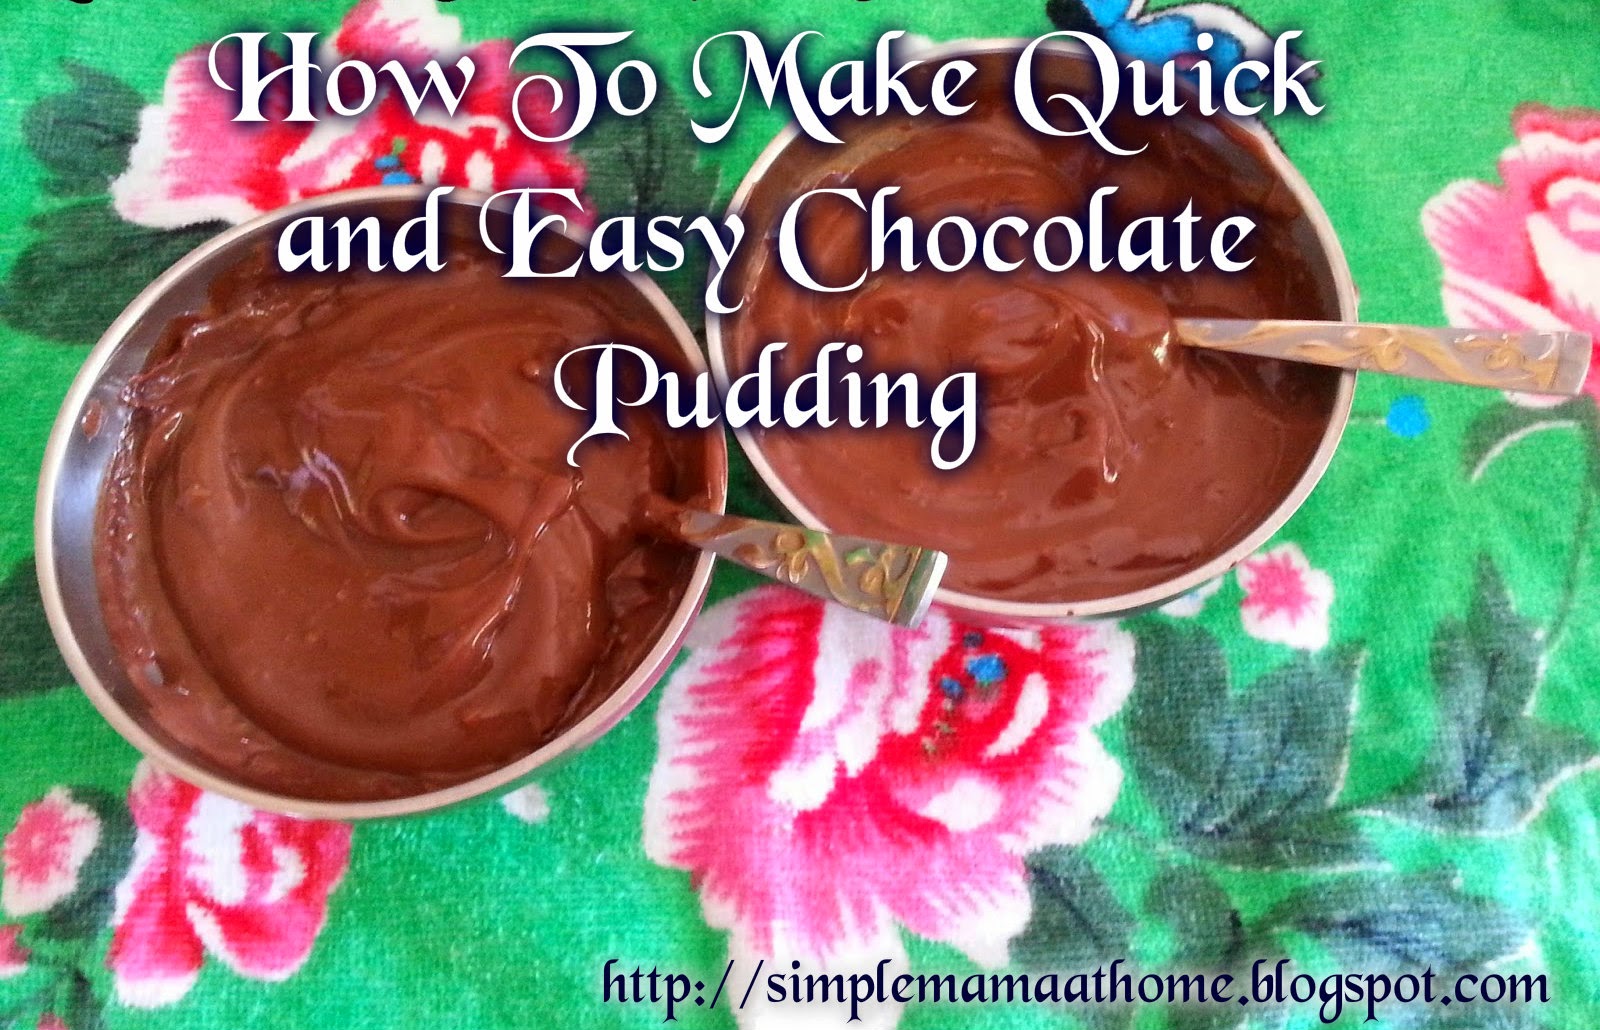 How To Make Quick and Easy Chocolate Pudding